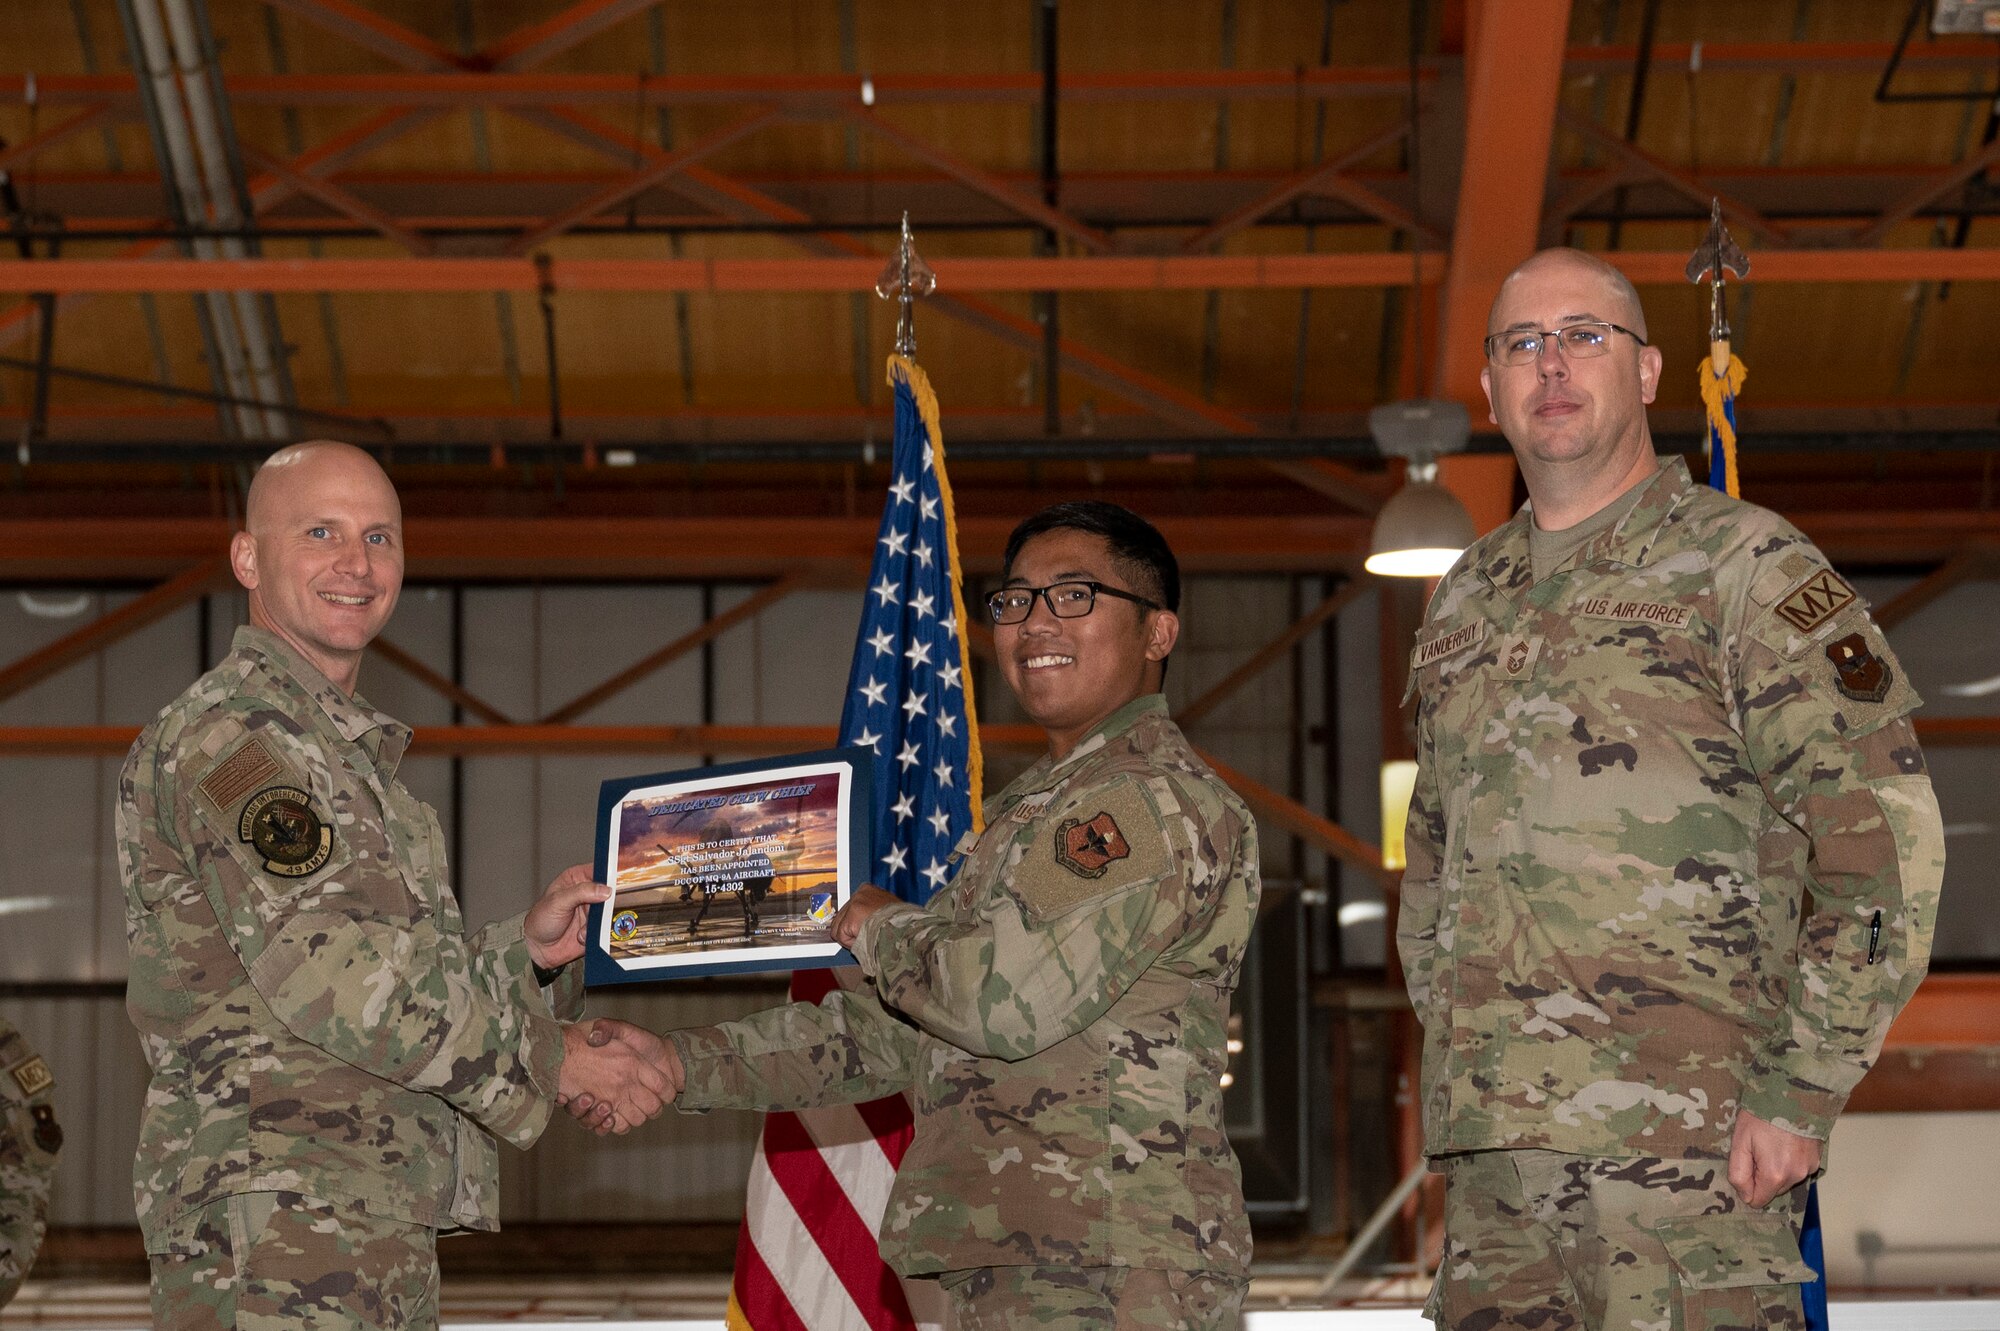 U.S. Air Force Staff Sgt. Salvador Jalandoni, center, 49th Aircraft Maintenance Squadron crew chief, receives a certificate from U.S. Air Force Maj. Donald Bolda, 49th Aircraft Maintenance Squadron commander, left, during the 2022 Dedicated Crew Chief Appointment Ceremony at Holloman Air Force Base, New Mexico, Nov. 18, 2022. To receive the title of DCC, a crew chief must demonstrate a history of superior performance in their career, comply with all safety practices and complete all required training. (U.S. Air Force photo by Airman 1st Class Isaiah Pedrazzini)